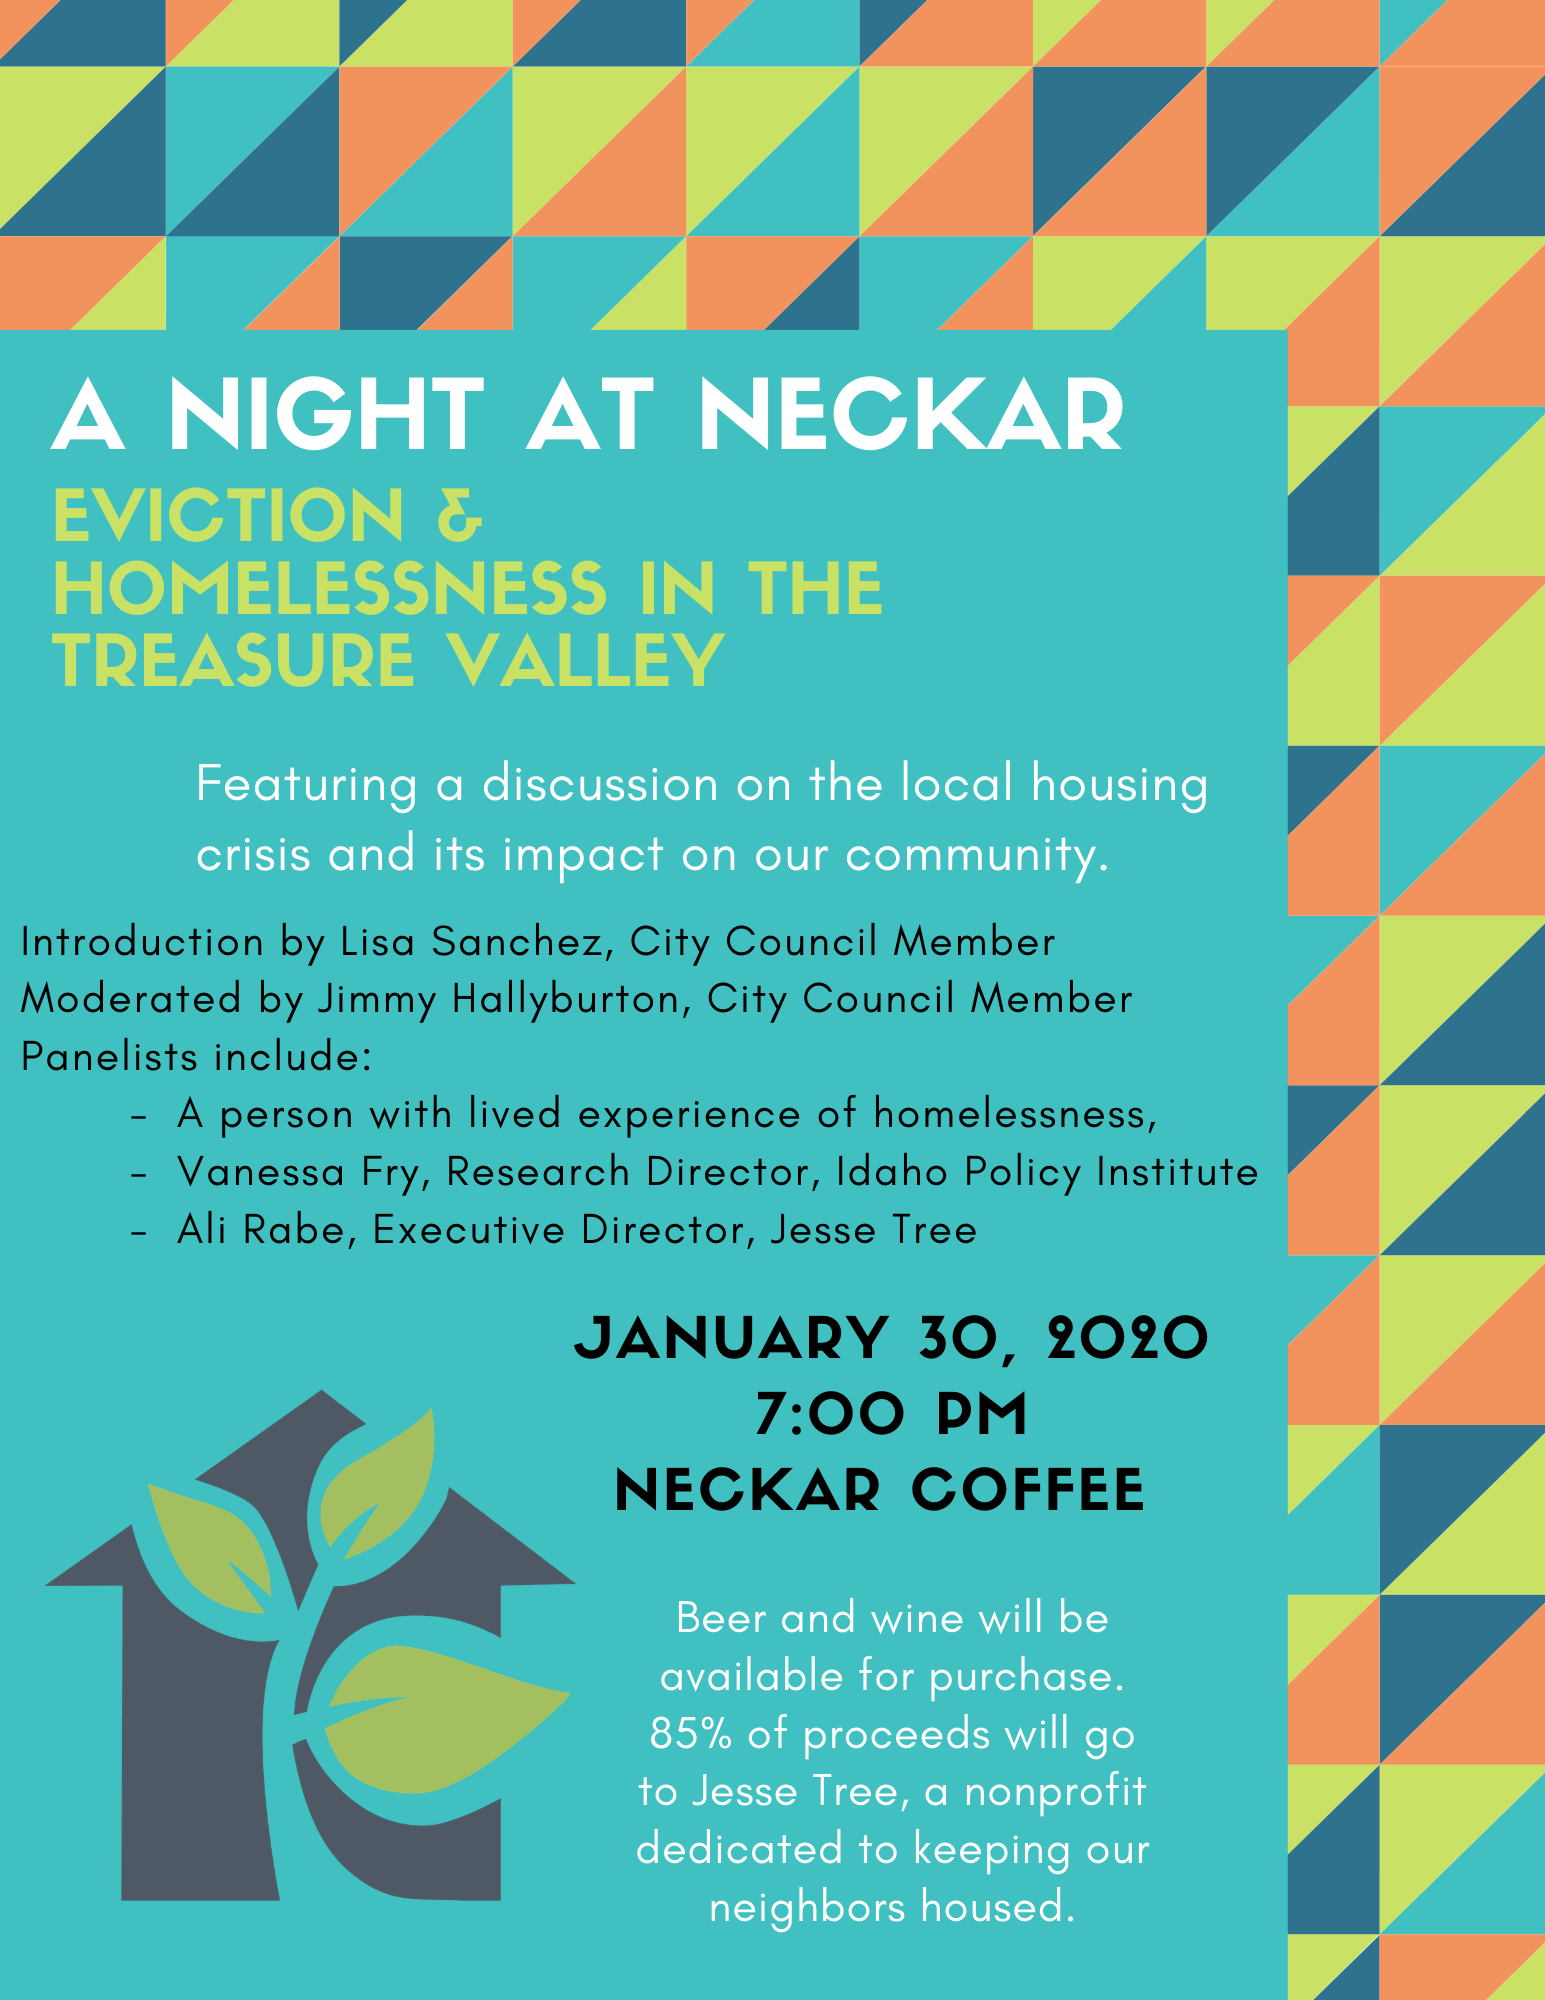 A Night At Neckar: Eviction and Homelessness in the Treasure Valley